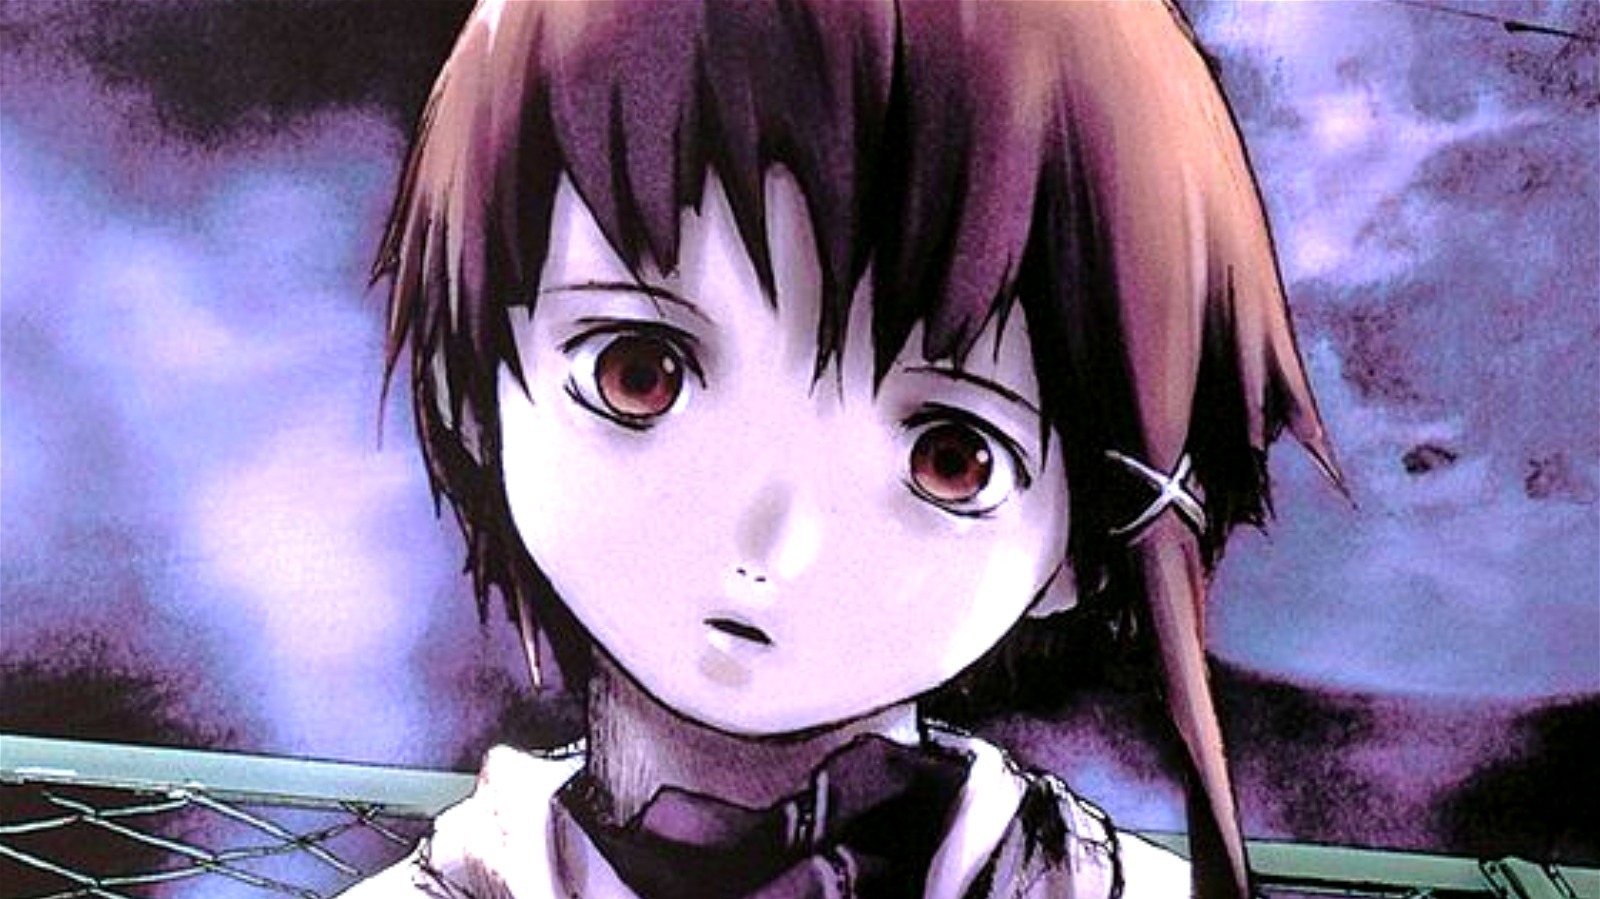 serial experiments lain 720p download free